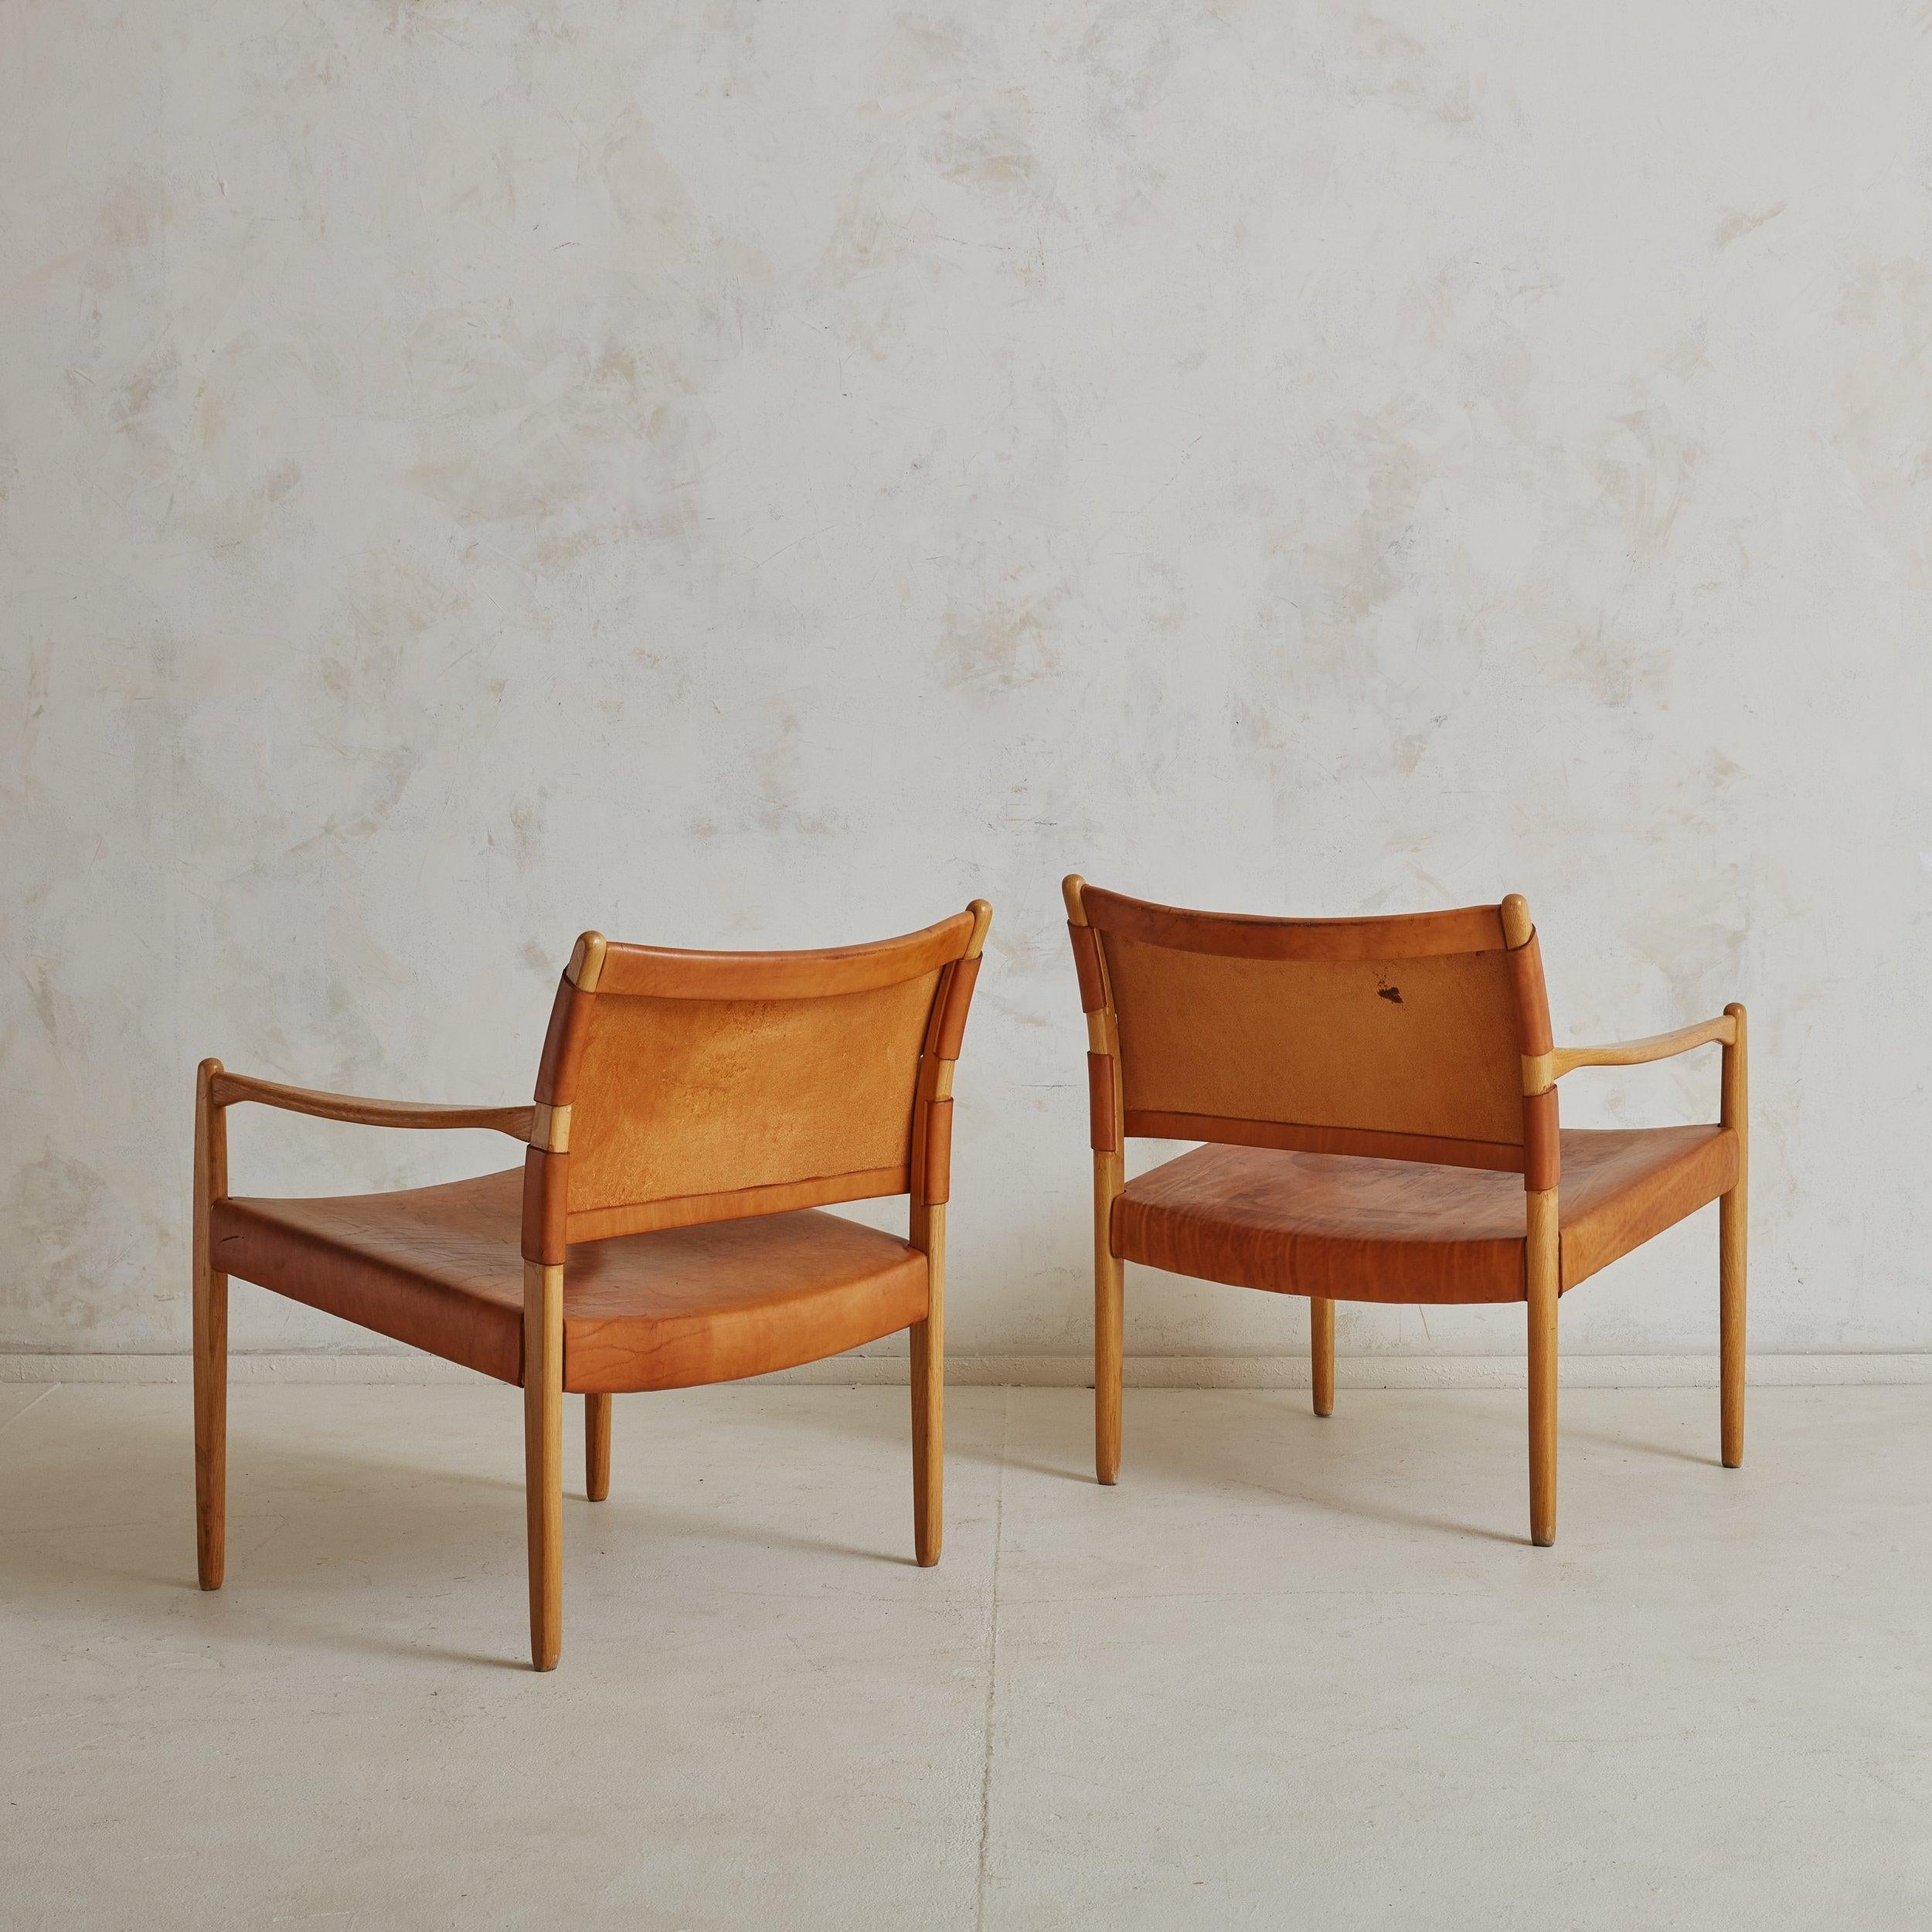 Pair of ‘Premiär 69’ oak and leather easy armchairs designed by Per-Olof Scotte for IKEA in 1967. These Swedish Modern armchairs feature minimalistic solid oak frames, cognac patinated saddle leather seats, and matching backrests. Sweden, 1960s.
 

